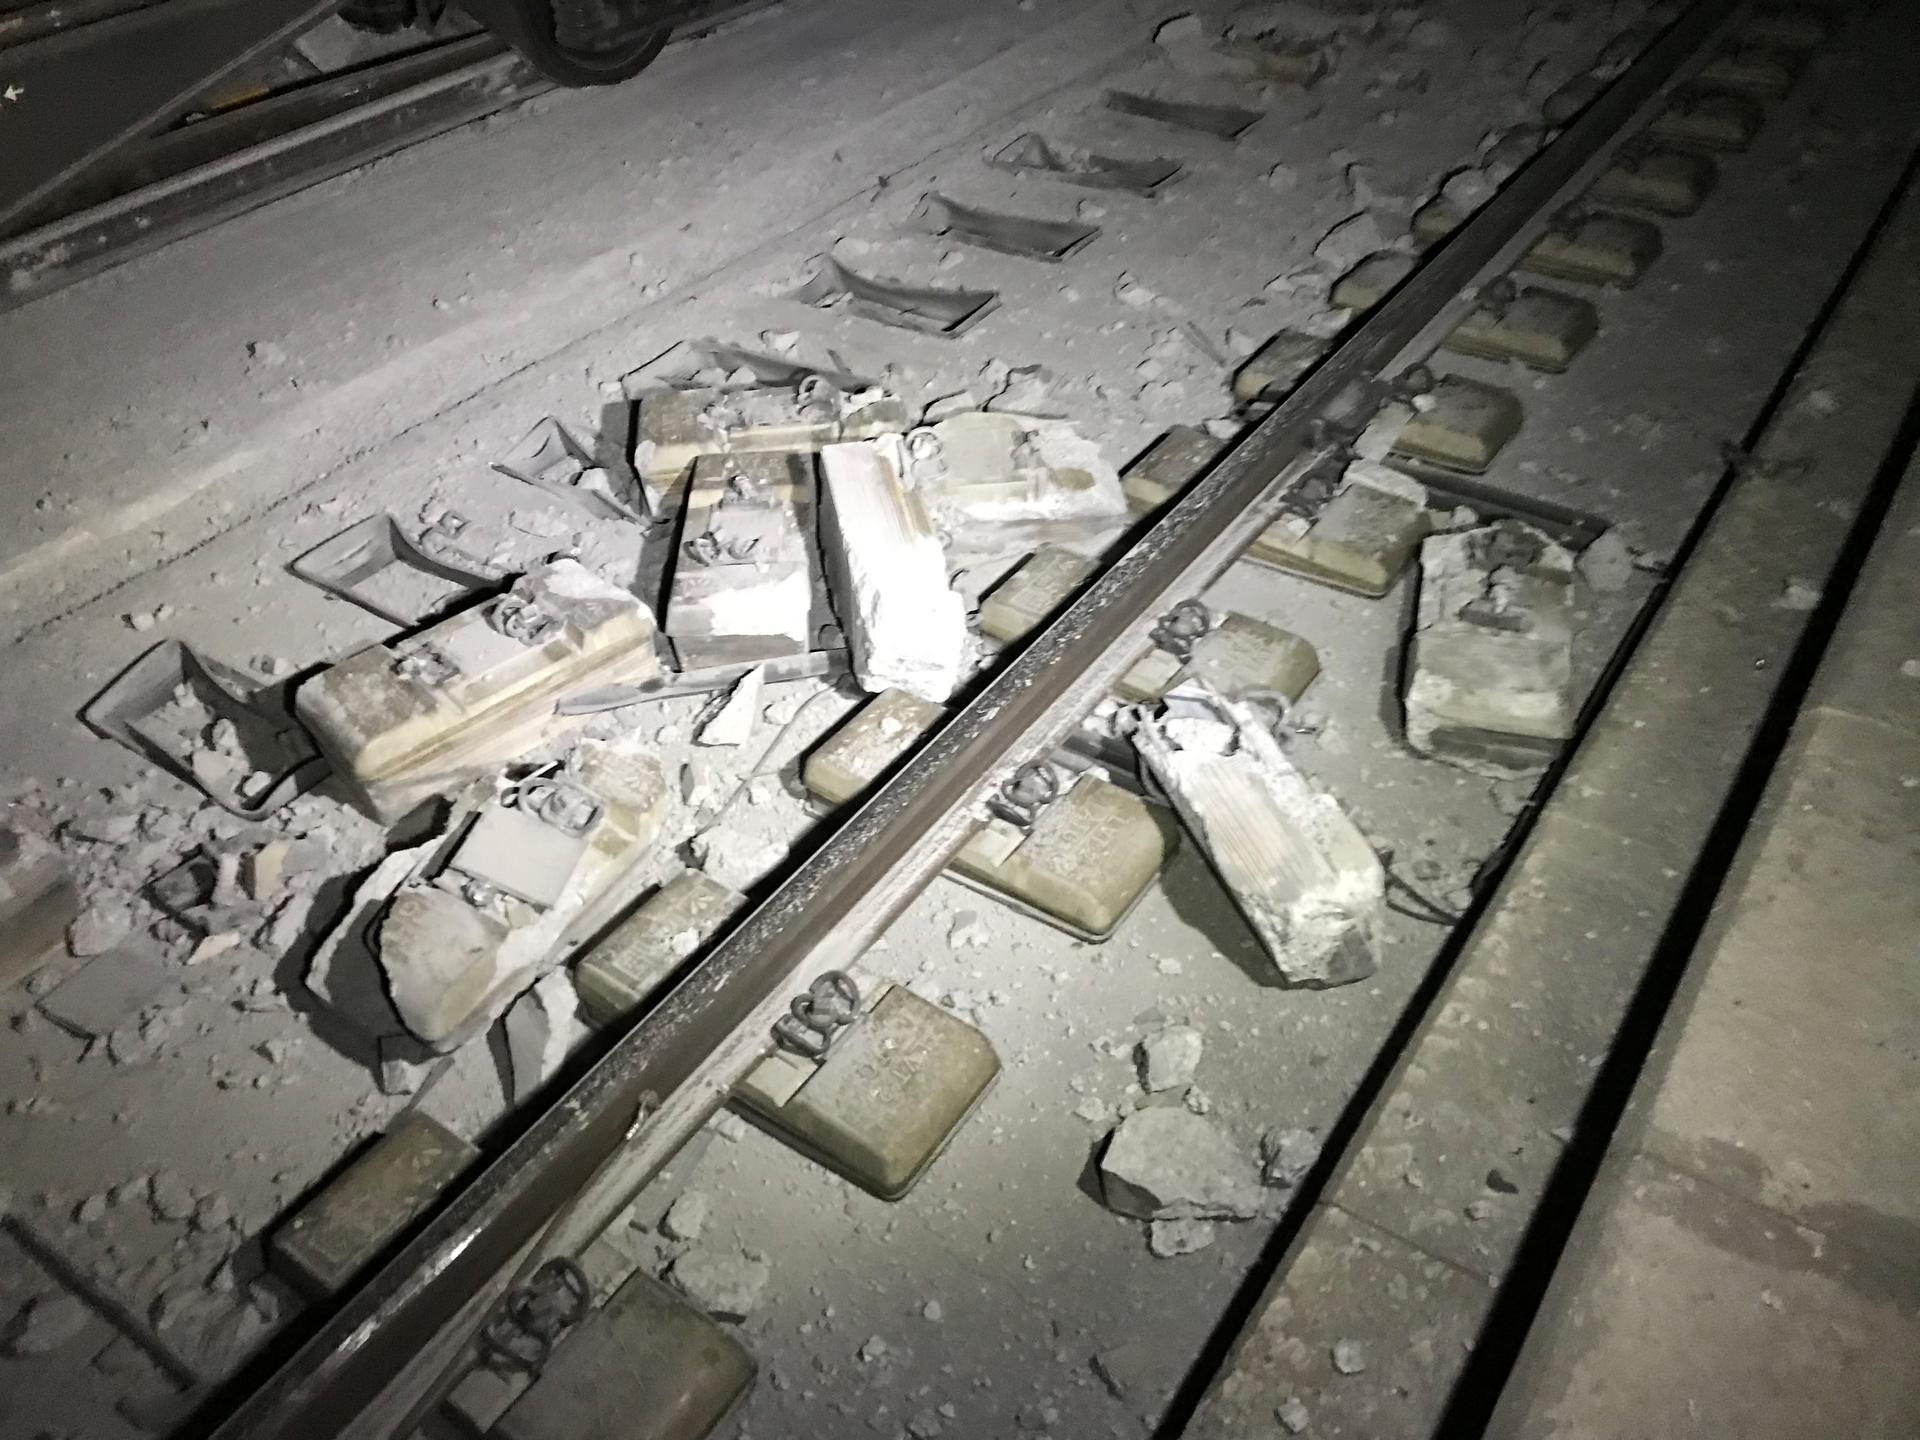 The derailment damaged much of the tunnel infrastructure, including sleepers 